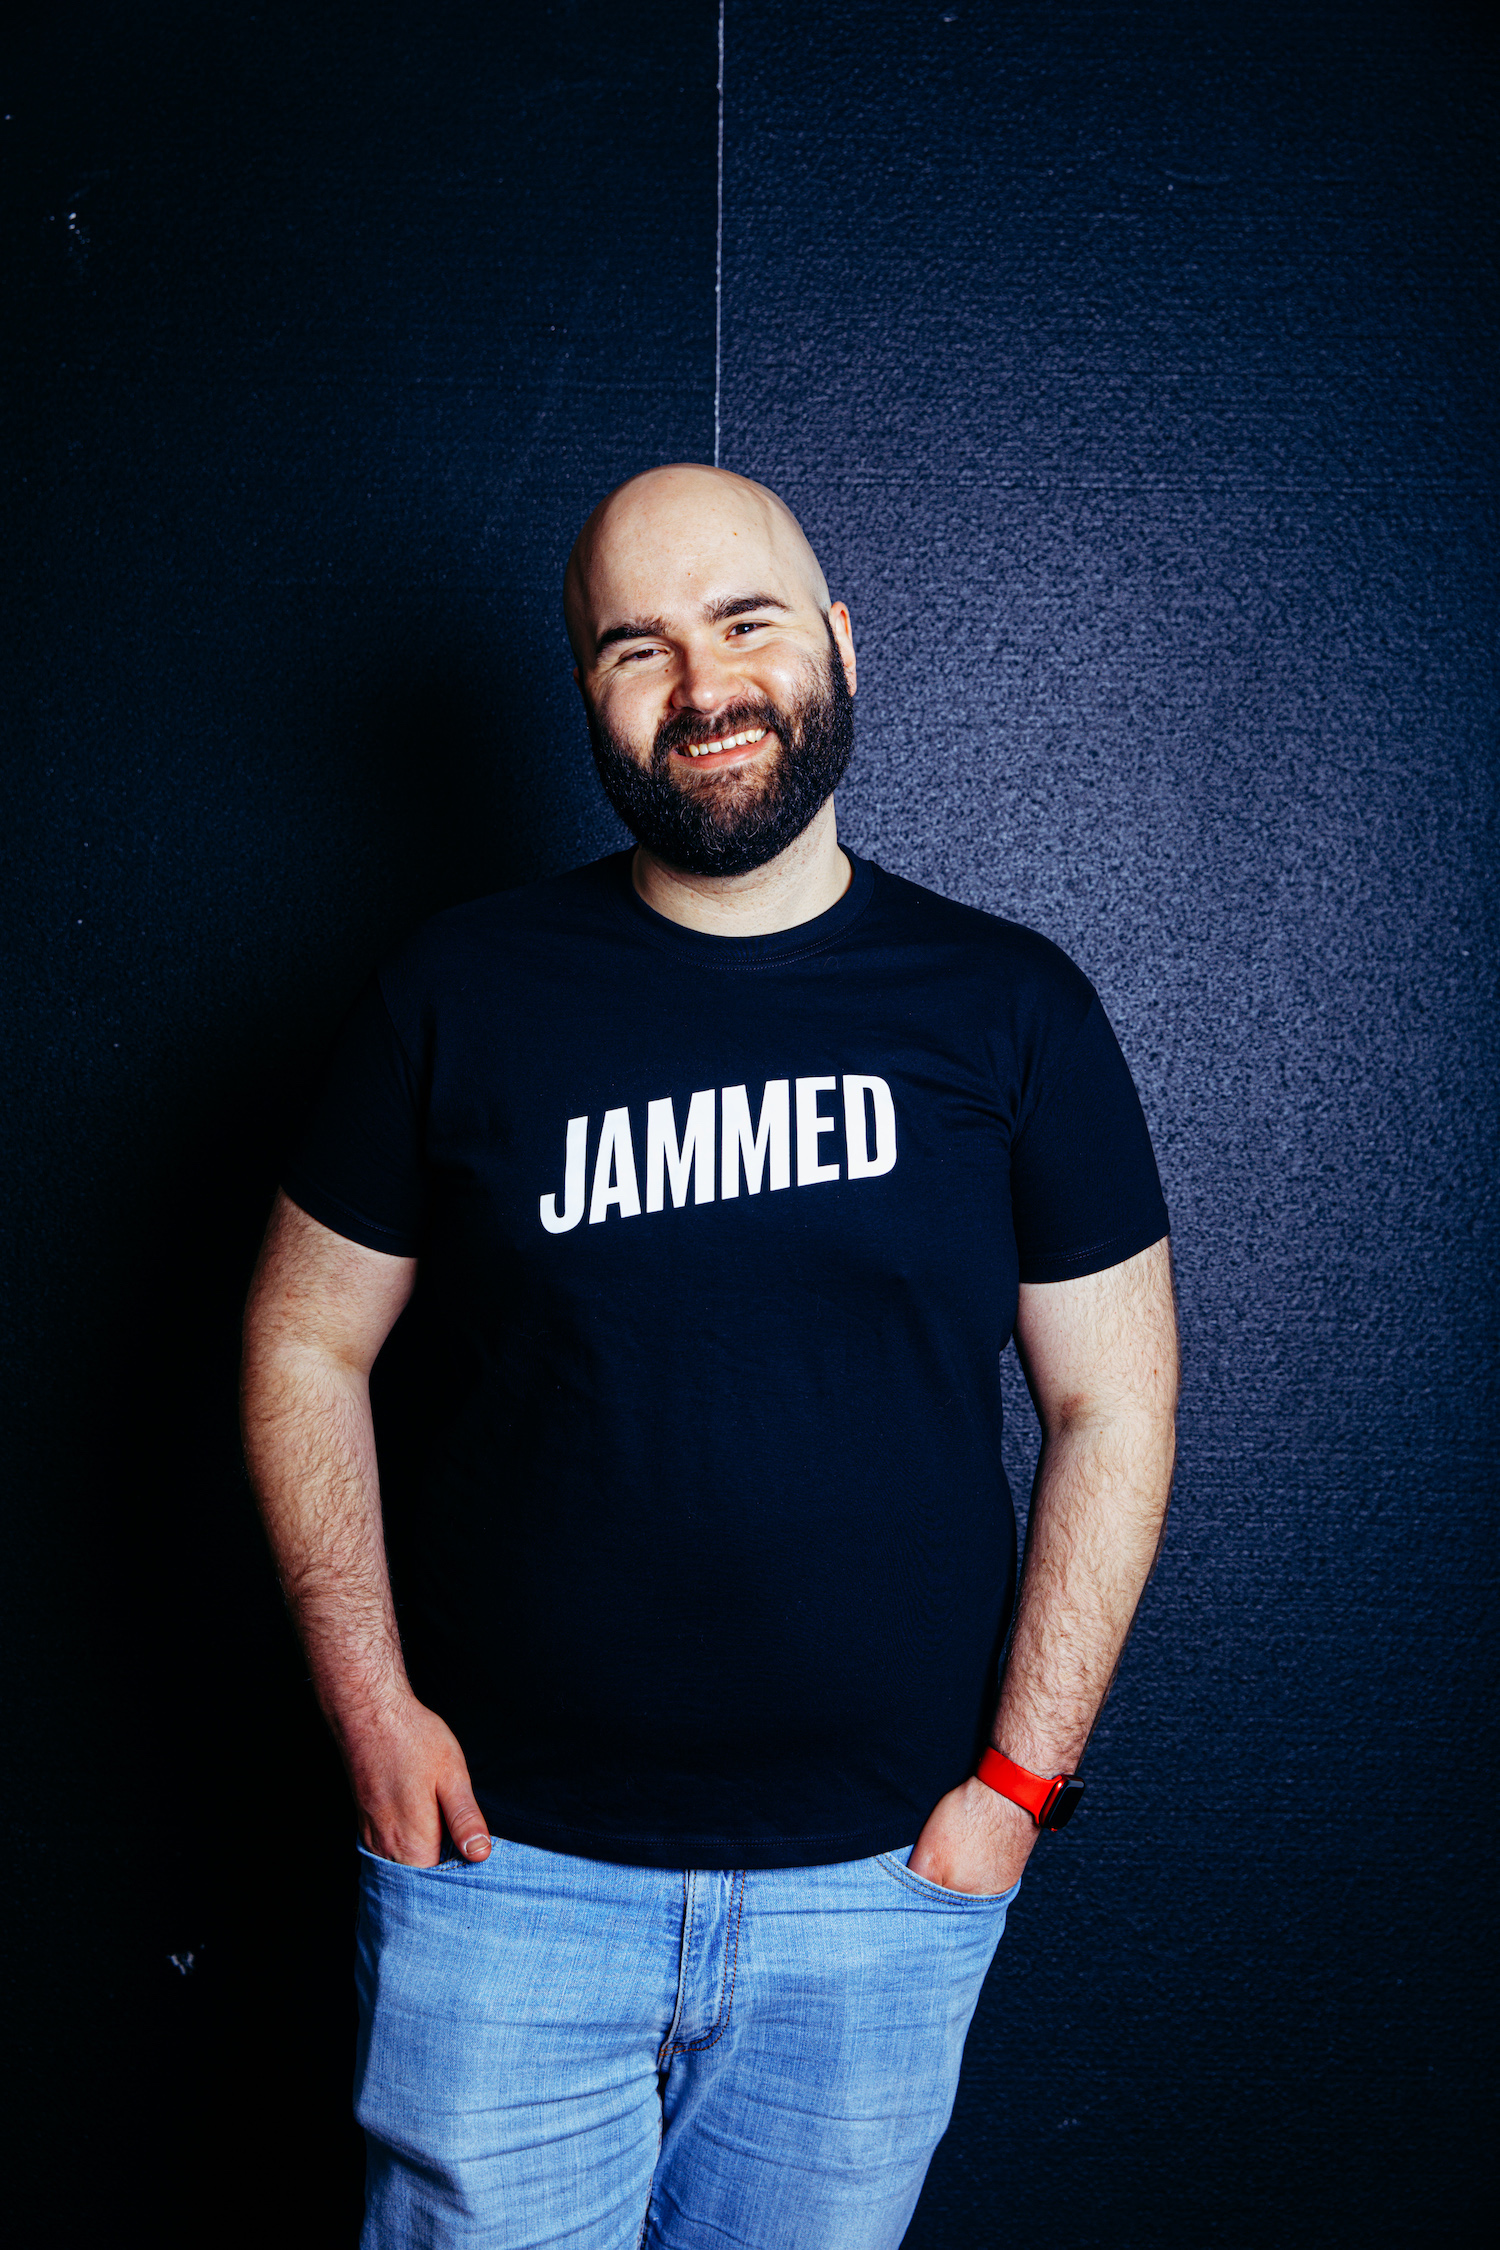 Jammed founder and CEO, Andy Callaghan